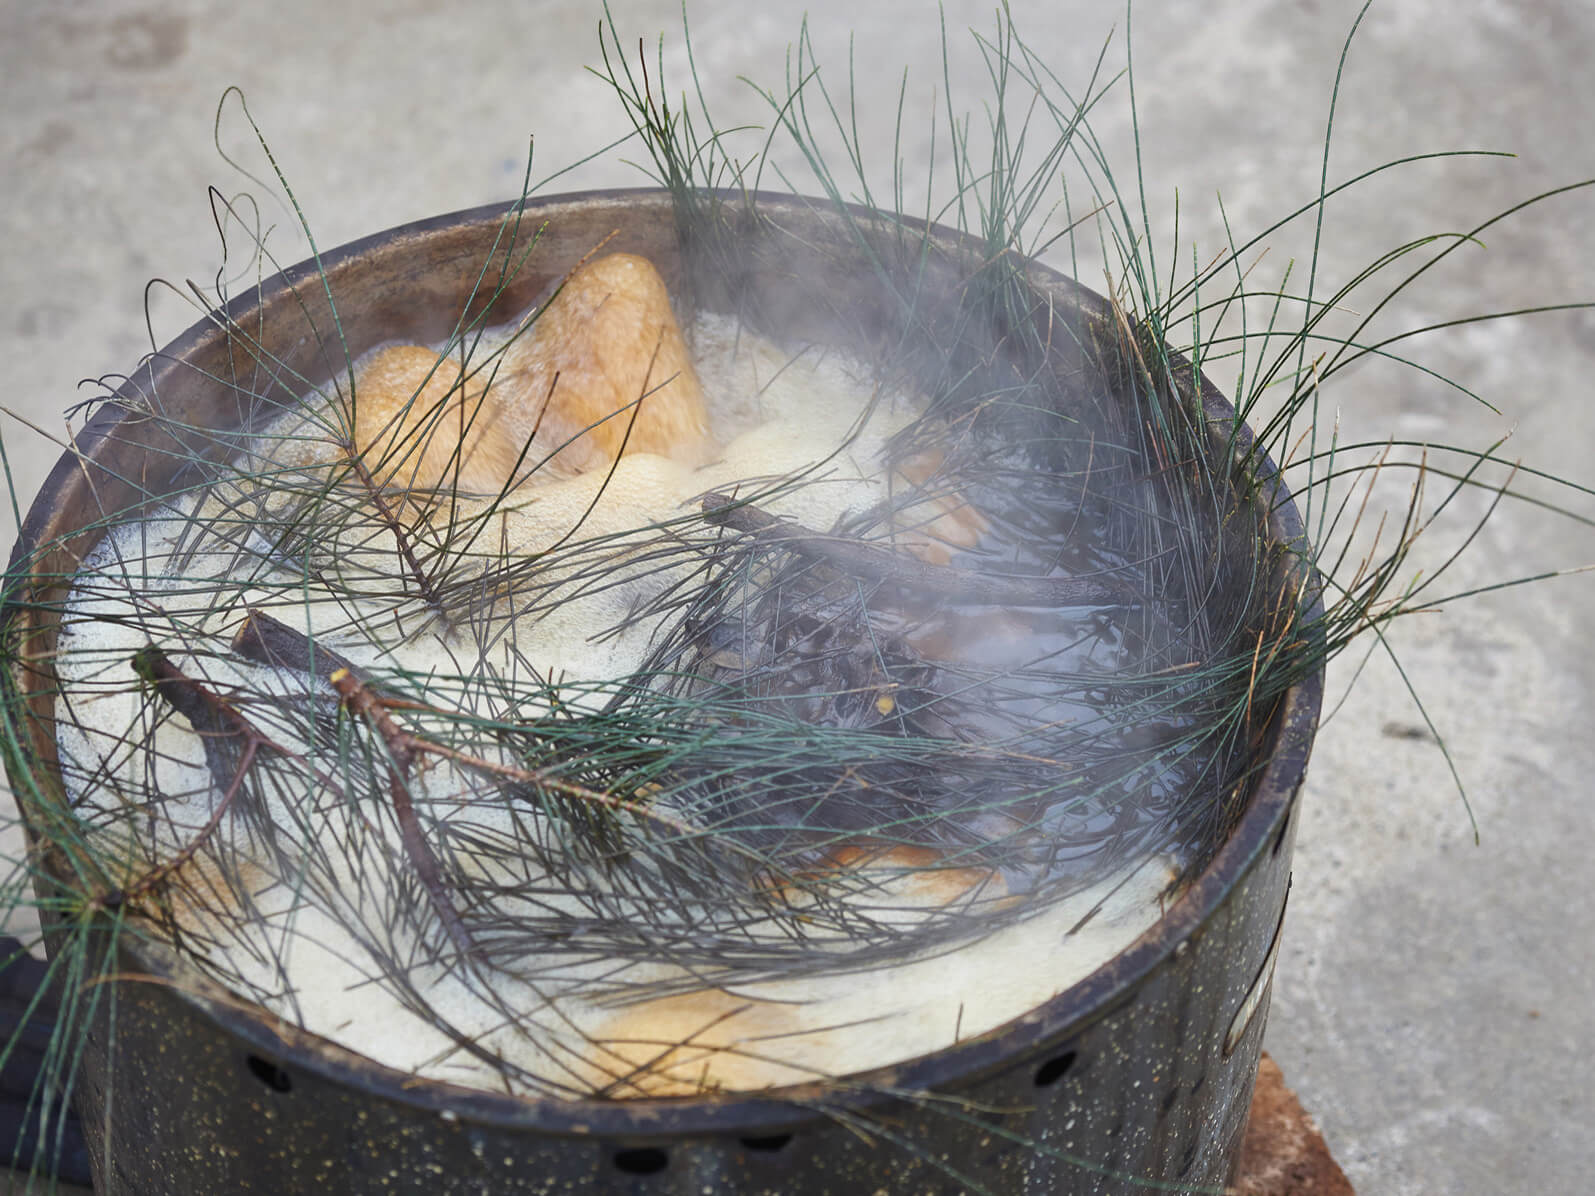 Biodynamic Preparation 508 being made from Casuarina needles. Can be used as a foliar spray to reduce fungal disease.